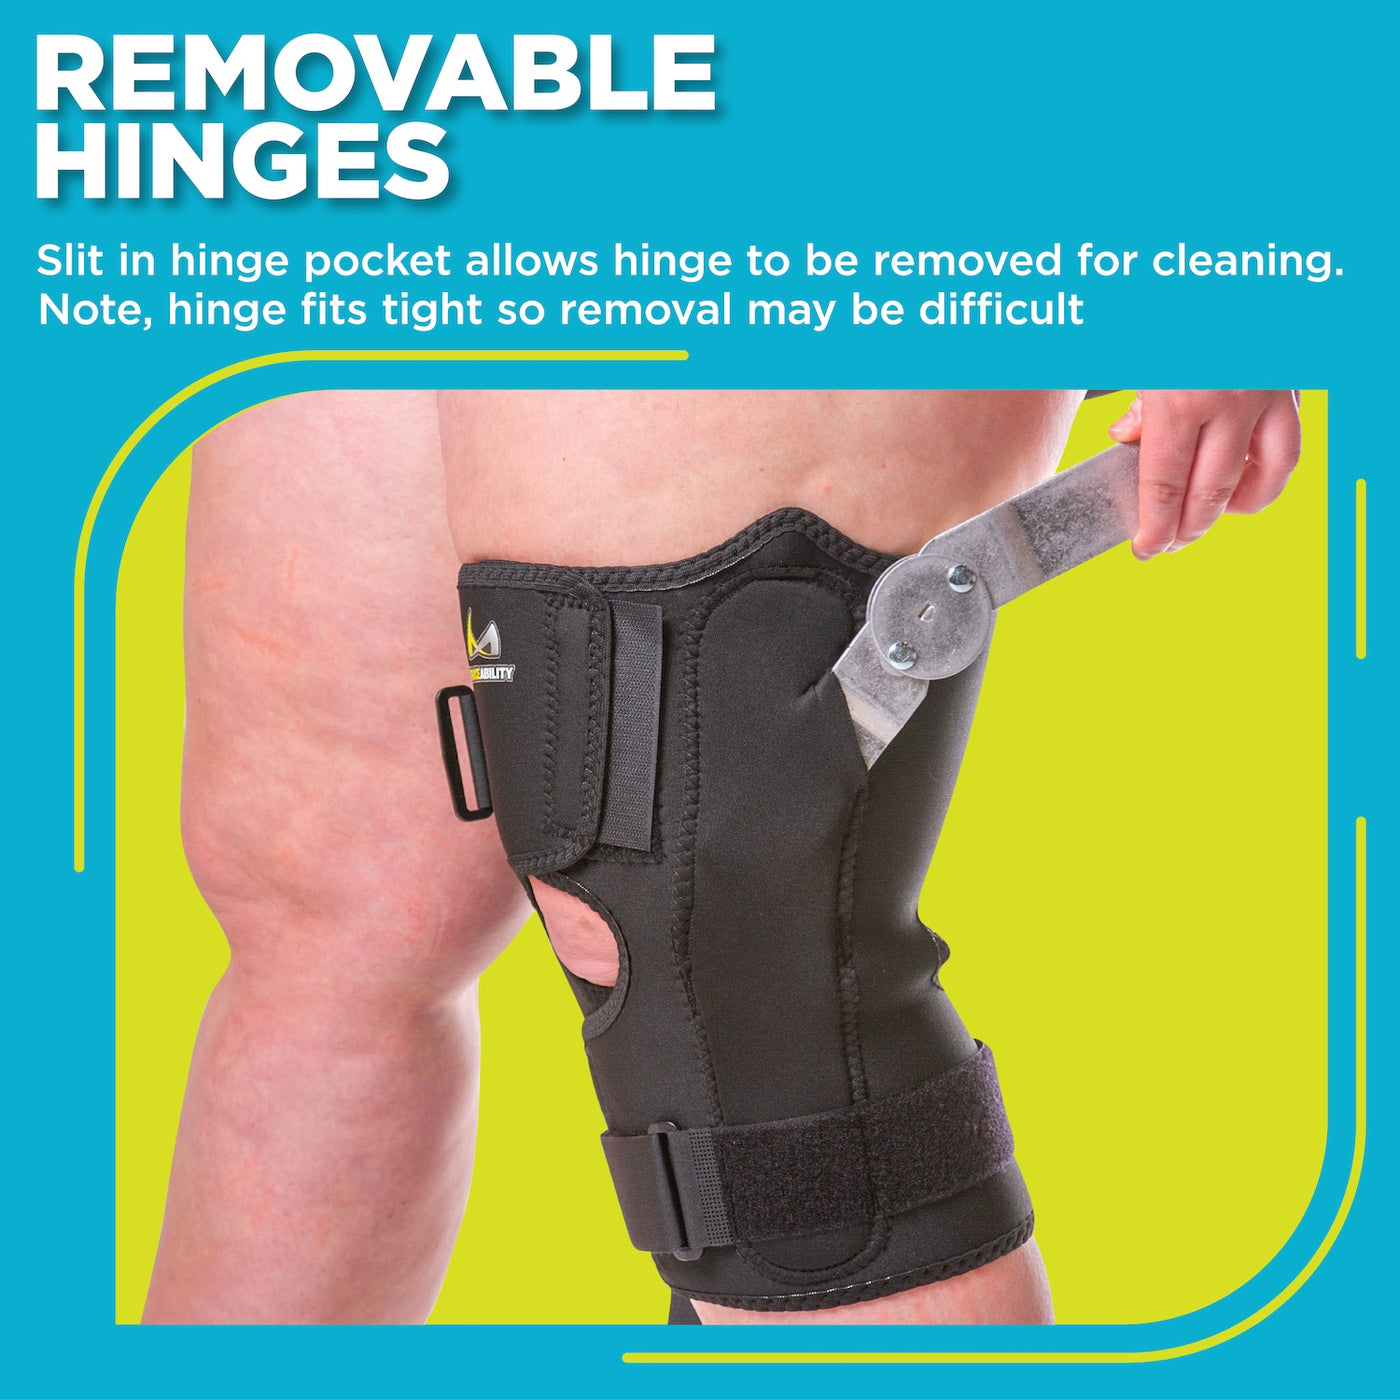 Hinges on our obesity knee pain brace can be removed through a small slit in the hinge pocket